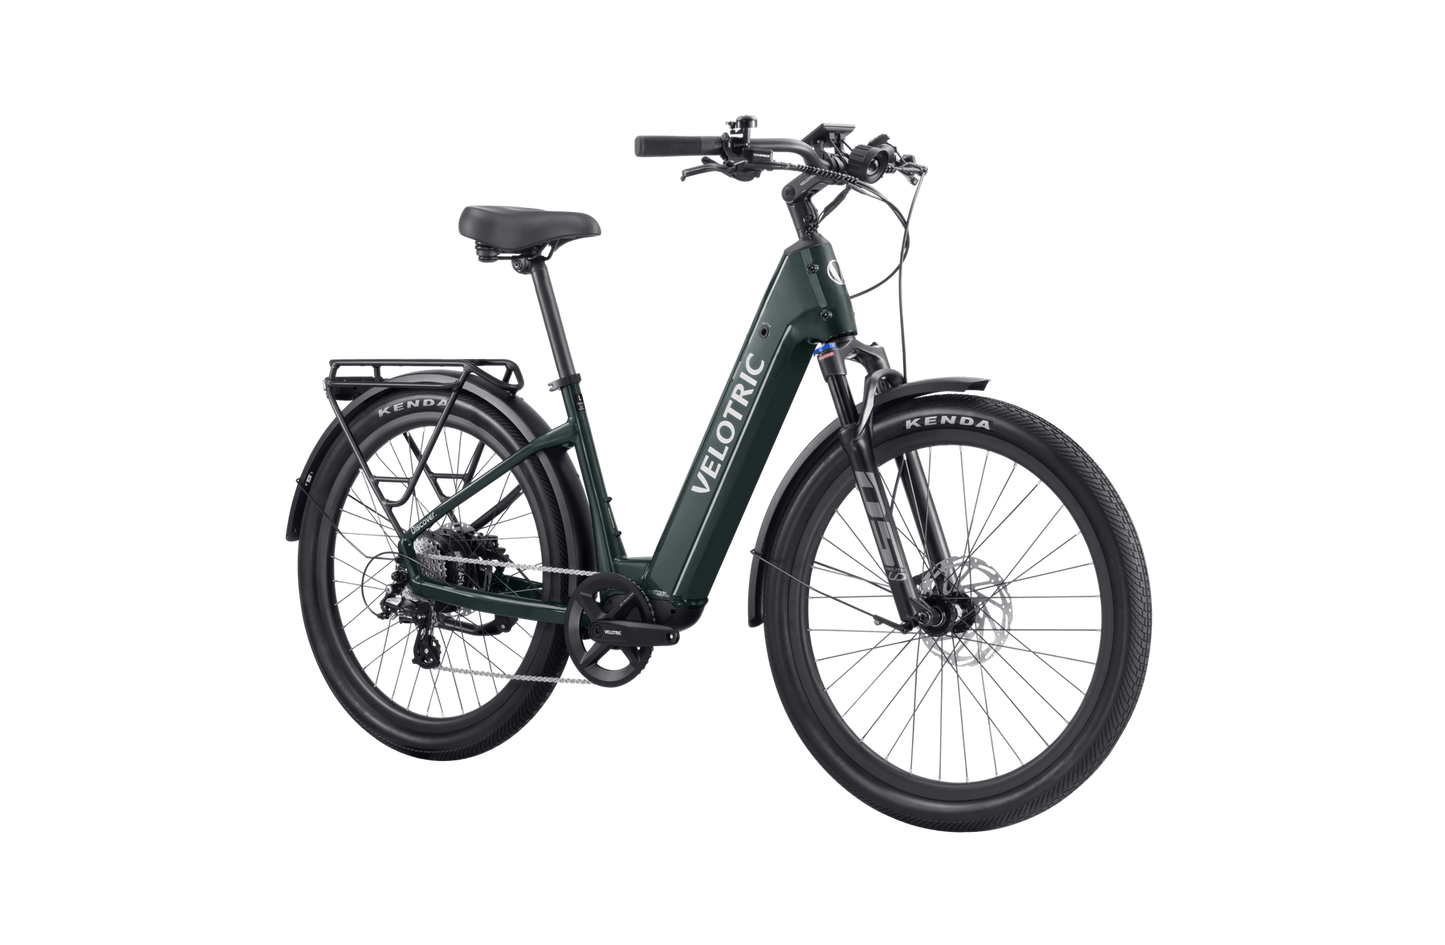 Sentence with replaced product:

Velotric Discover 2 electric bicycle parked against a black background.